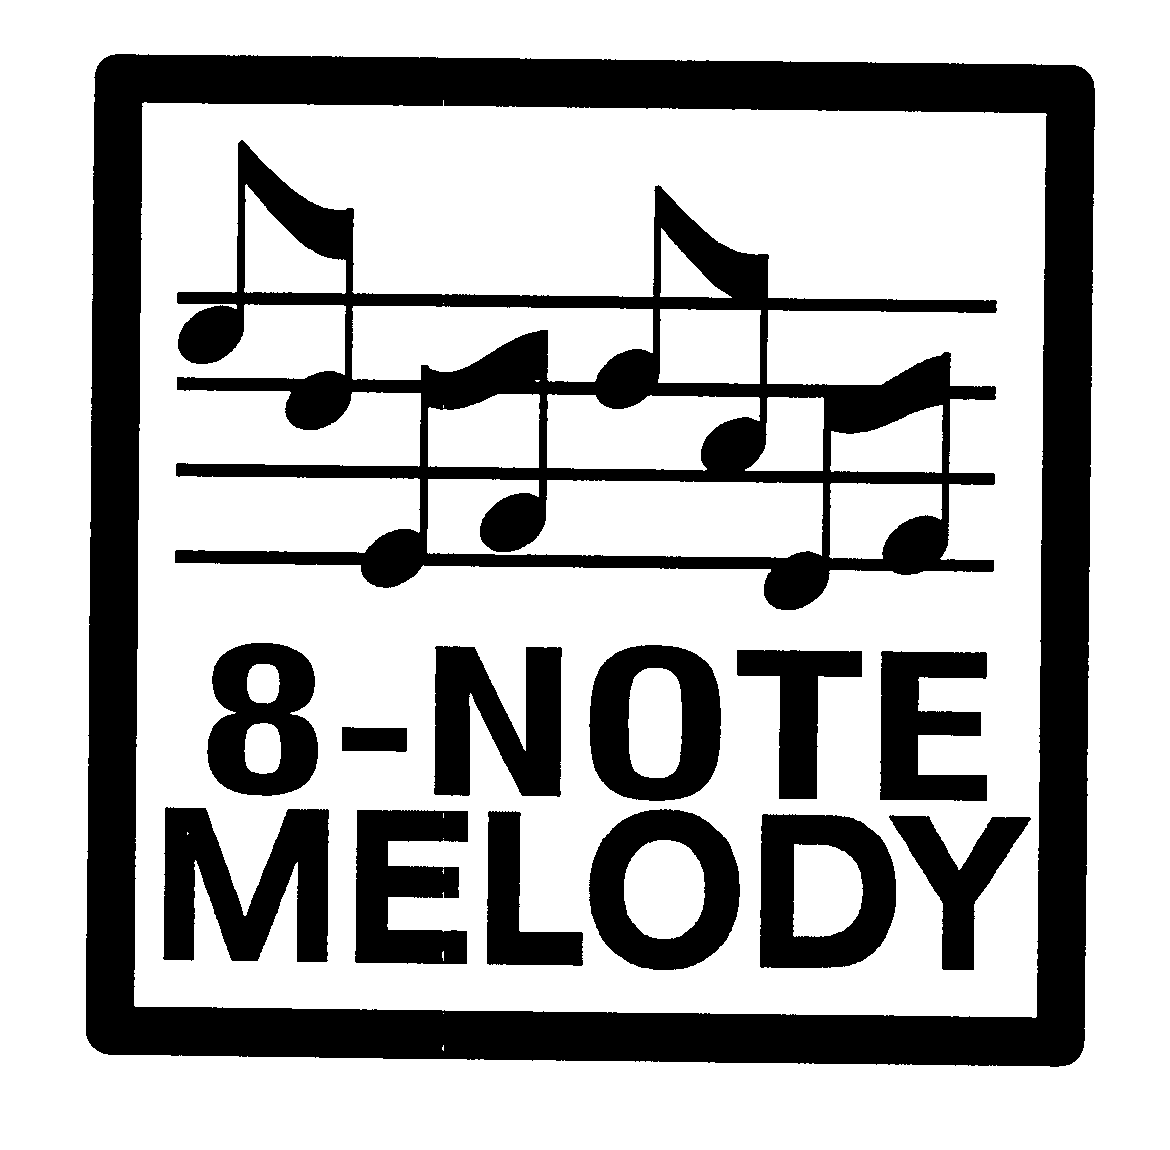  8-NOTE MELODY